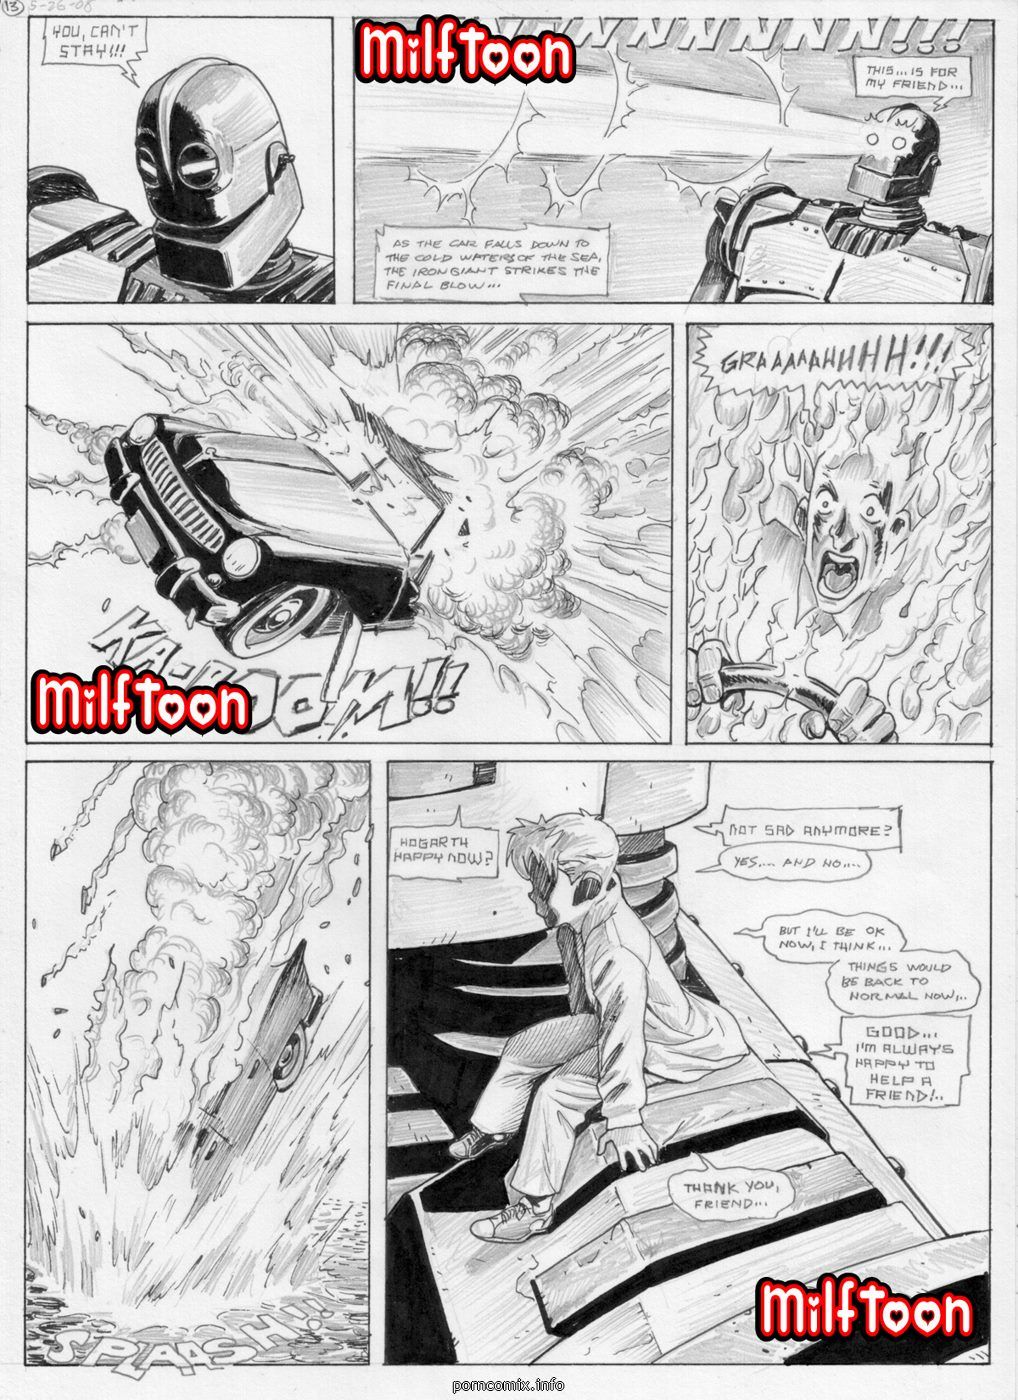 Milftoon - Iron Giant 2, Incest page 14